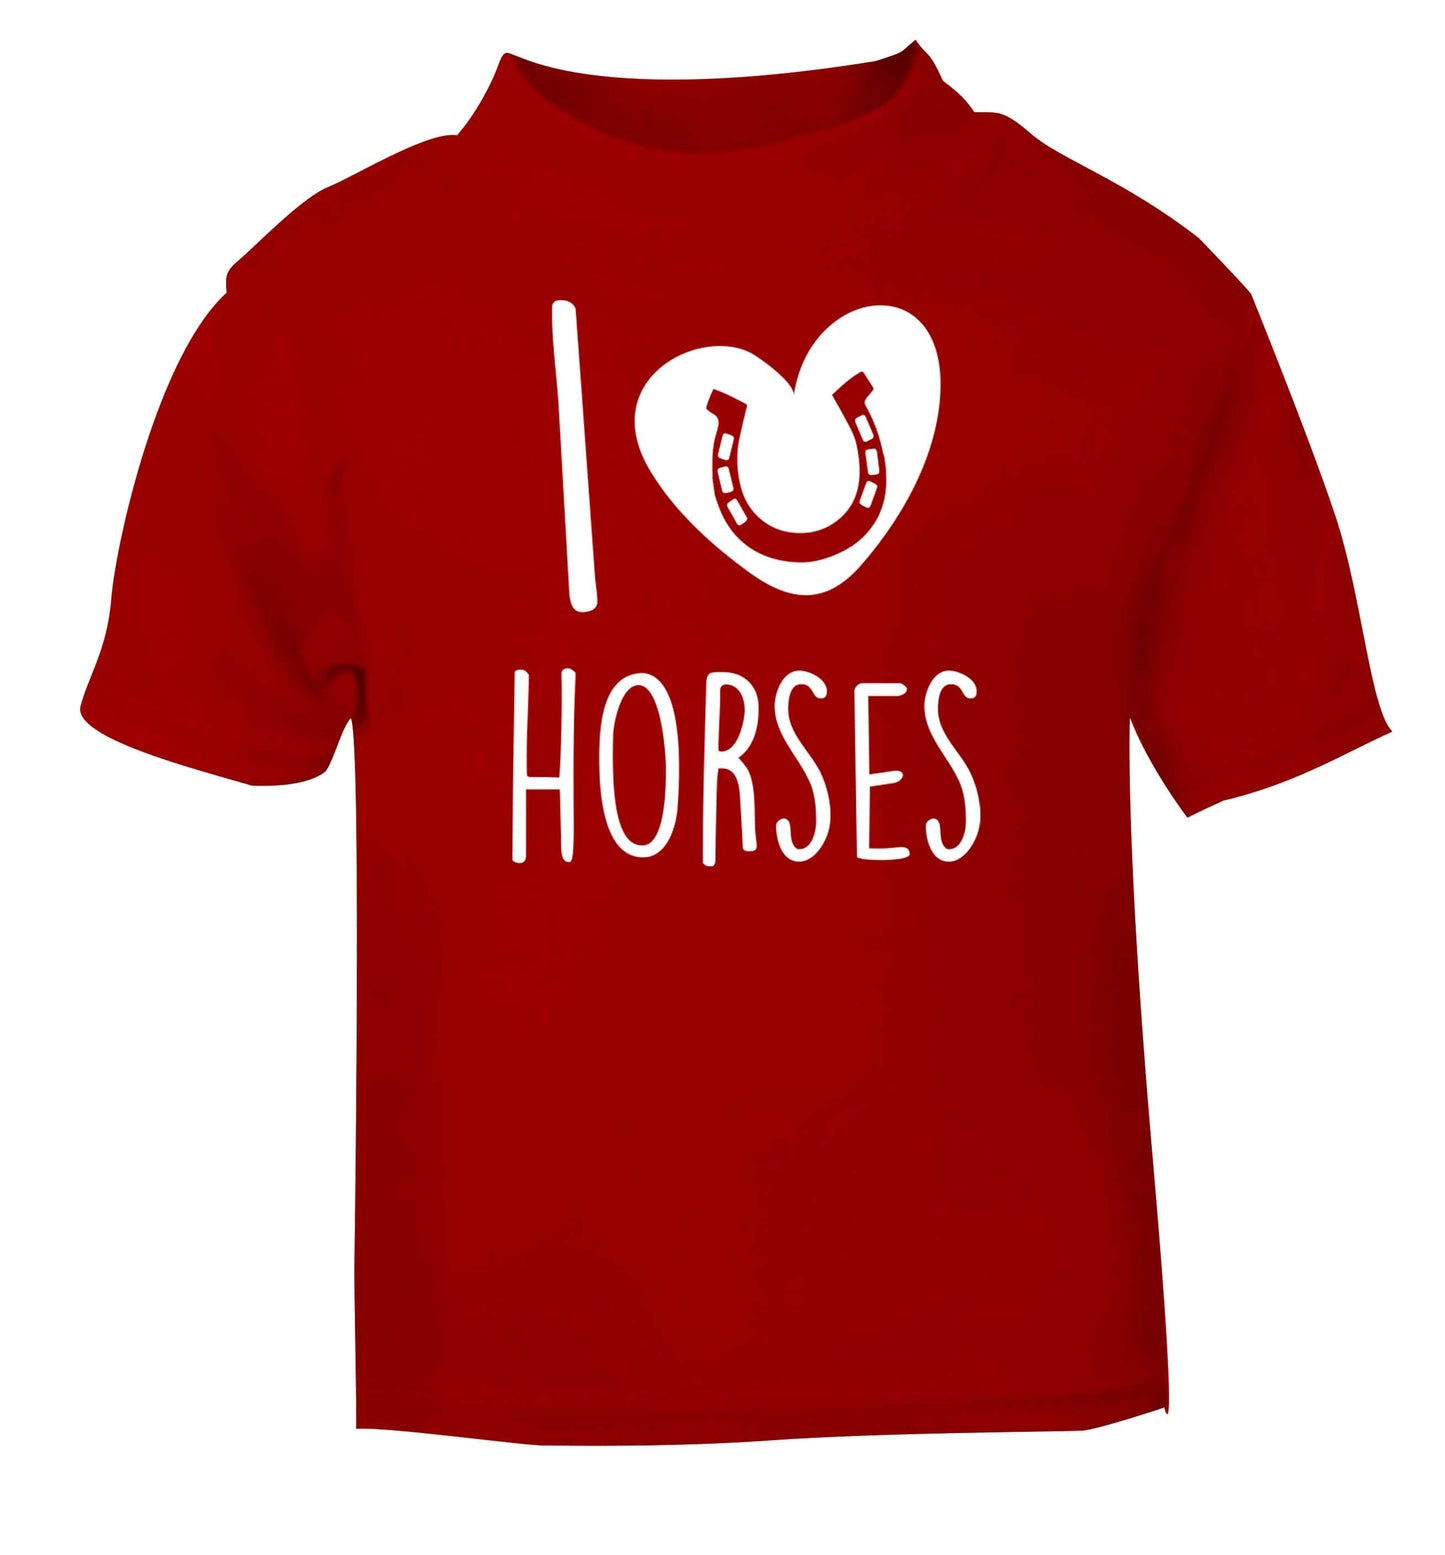 I love horses red baby toddler Tshirt 2 Years